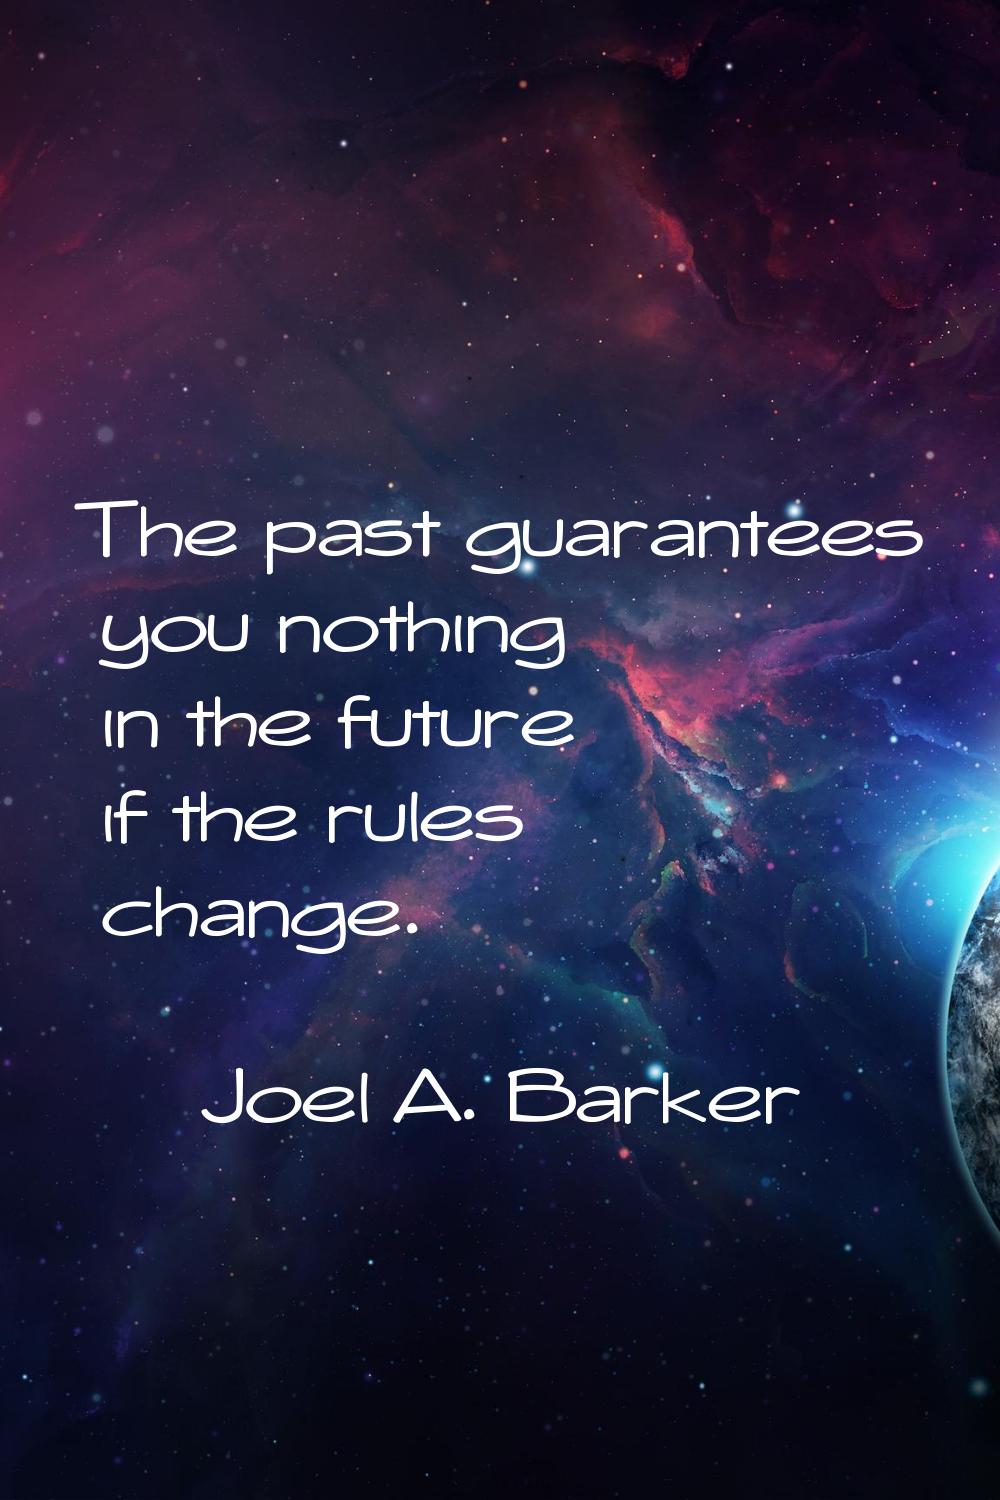 The past guarantees you nothing in the future if the rules change.